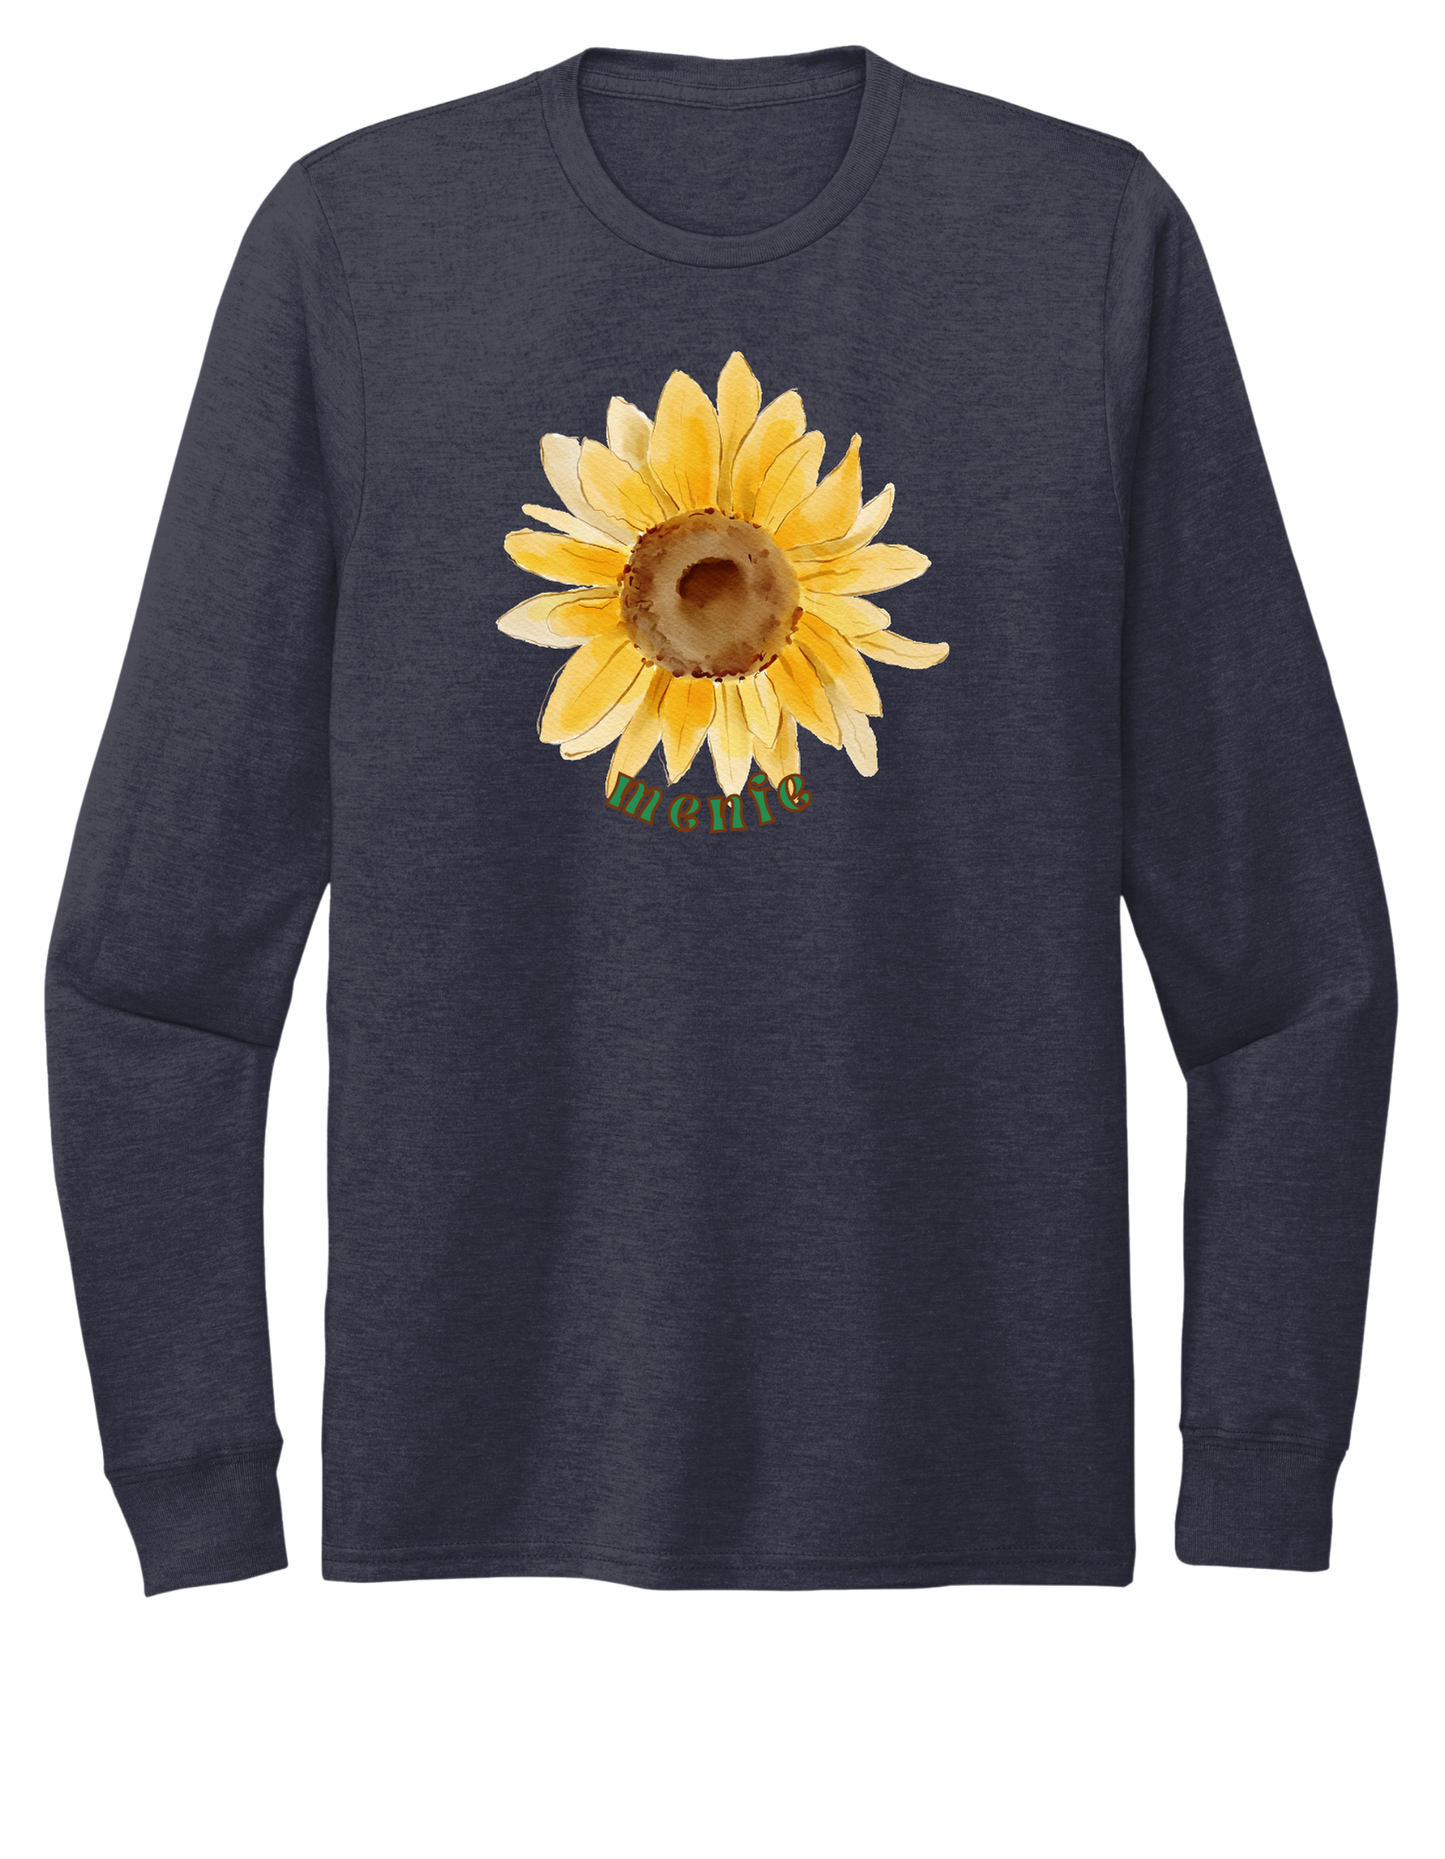 Sunflower Long Sleeve - Natural, Black and Navy Blue